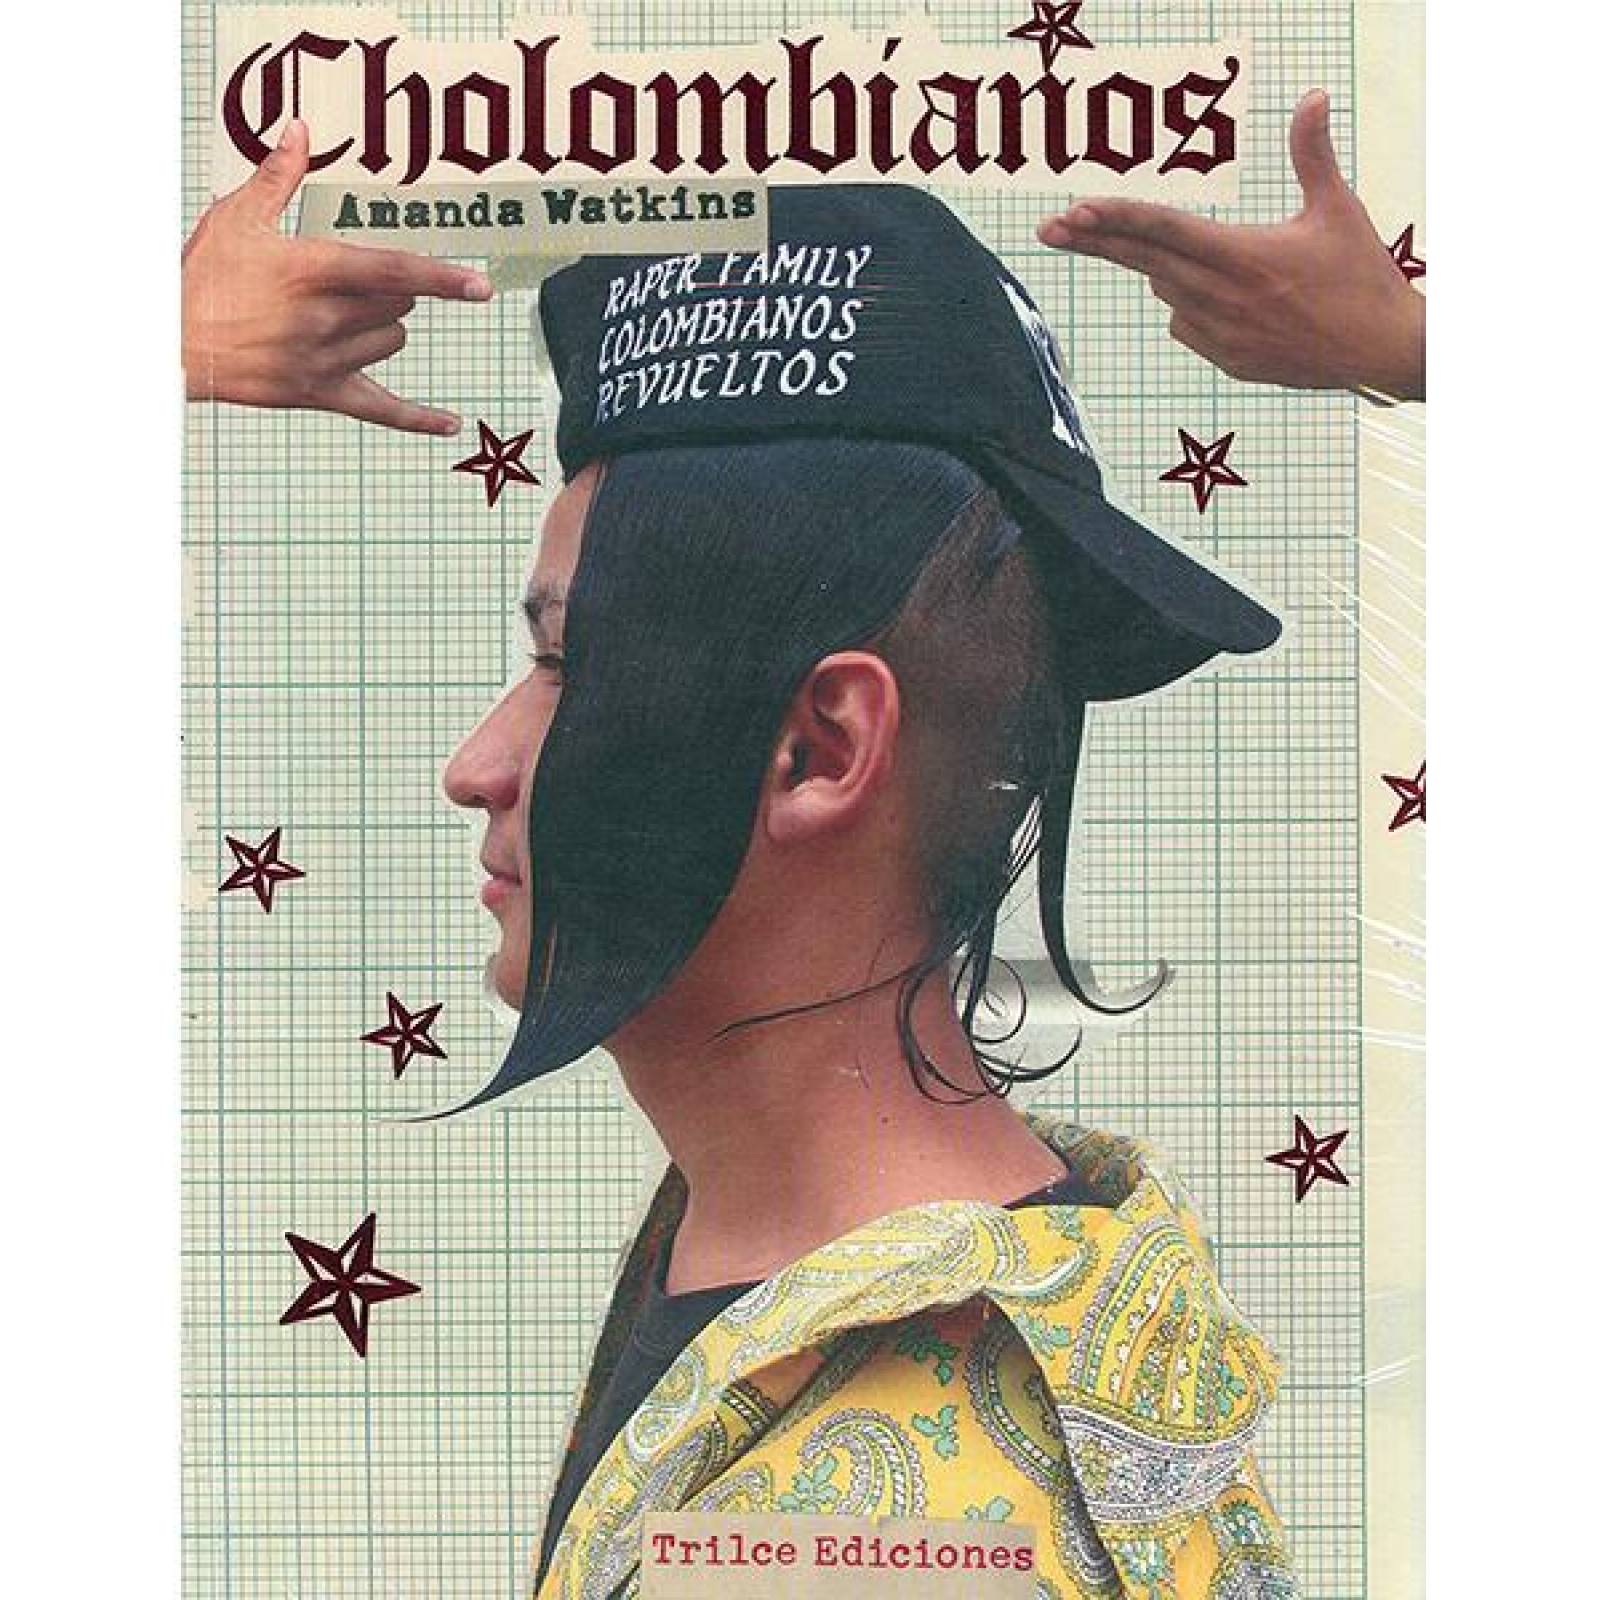 Cholombianos 